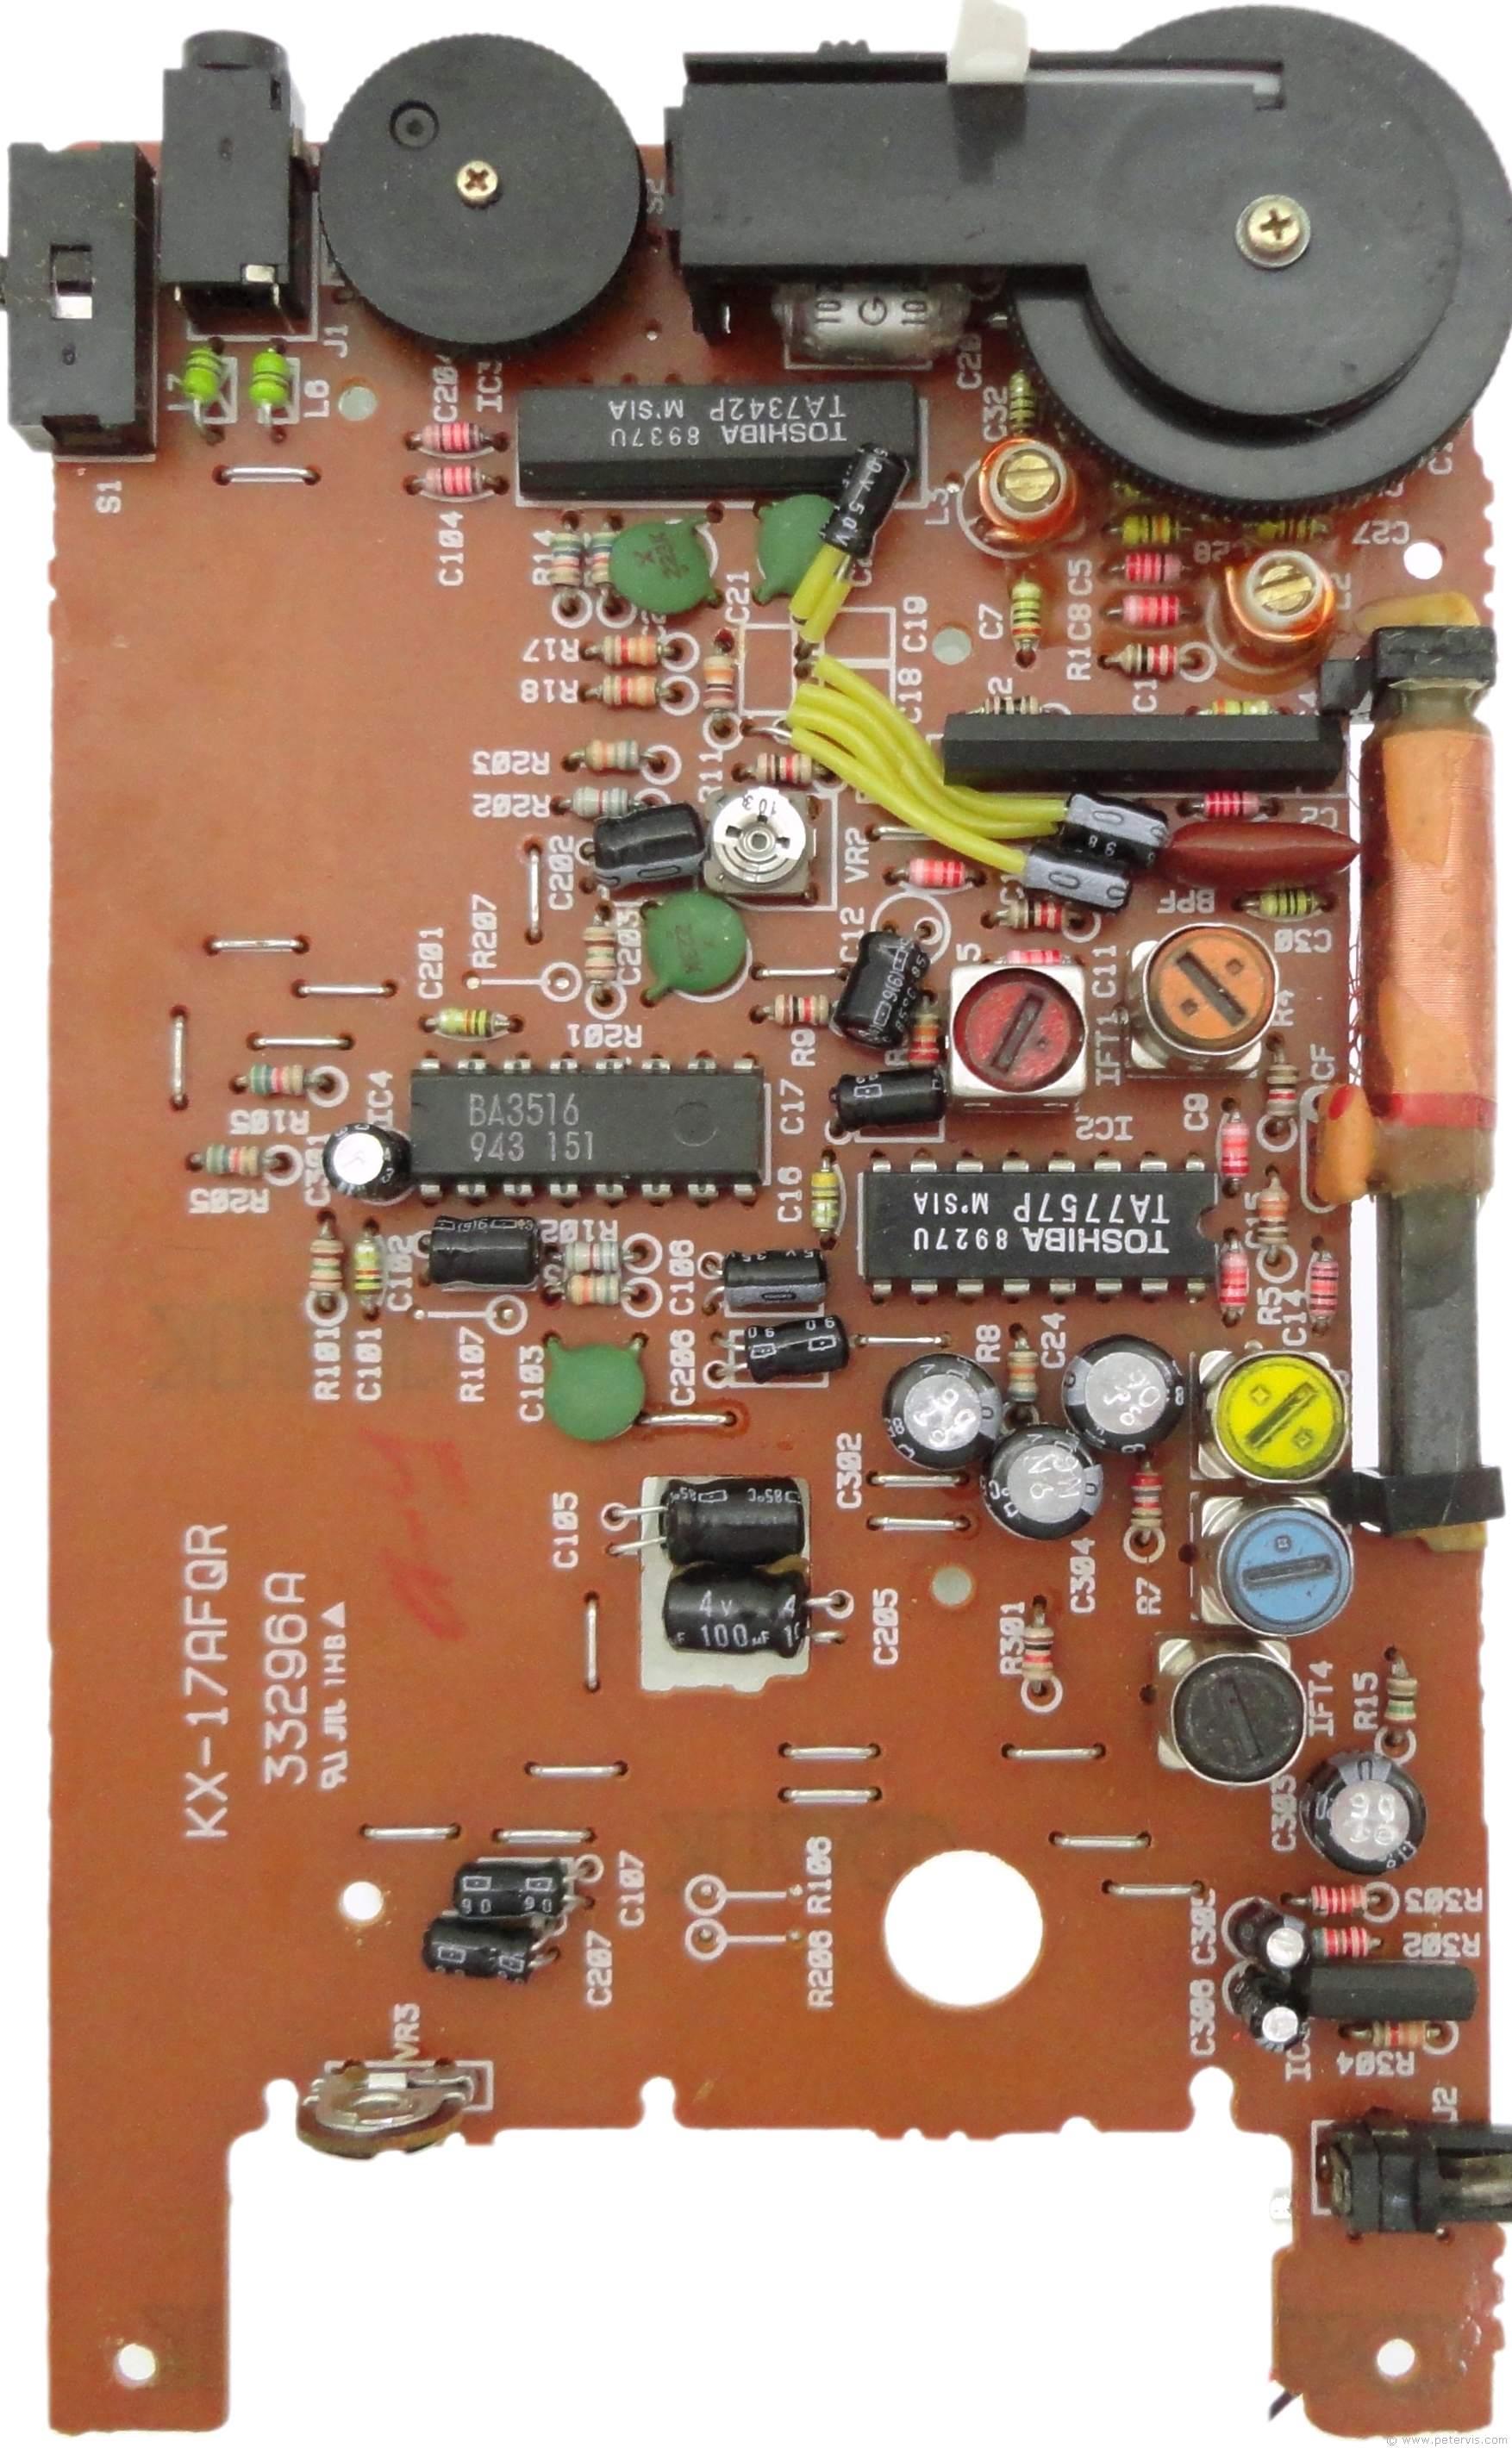 PCB Component Side